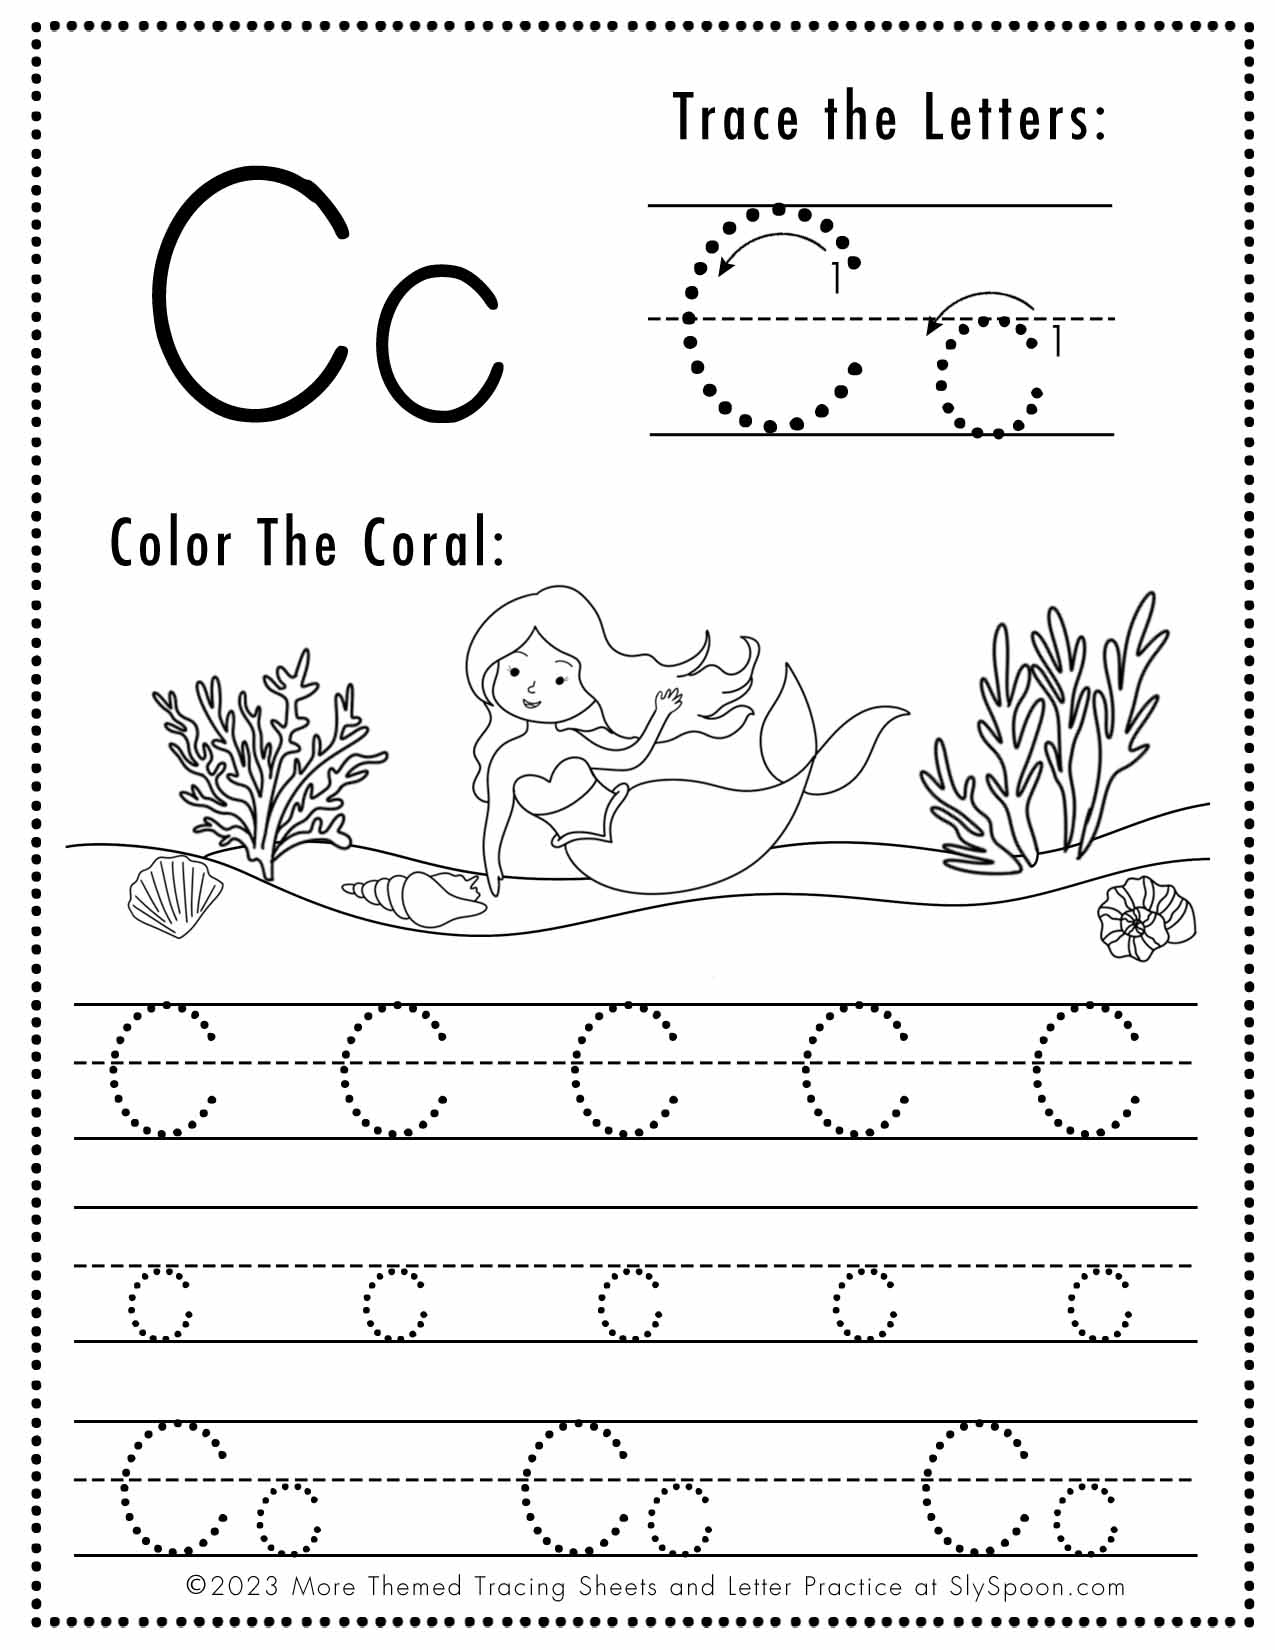 Free Letter C Tracing Worksheets Printable Mermaid Themed Sly Spoon